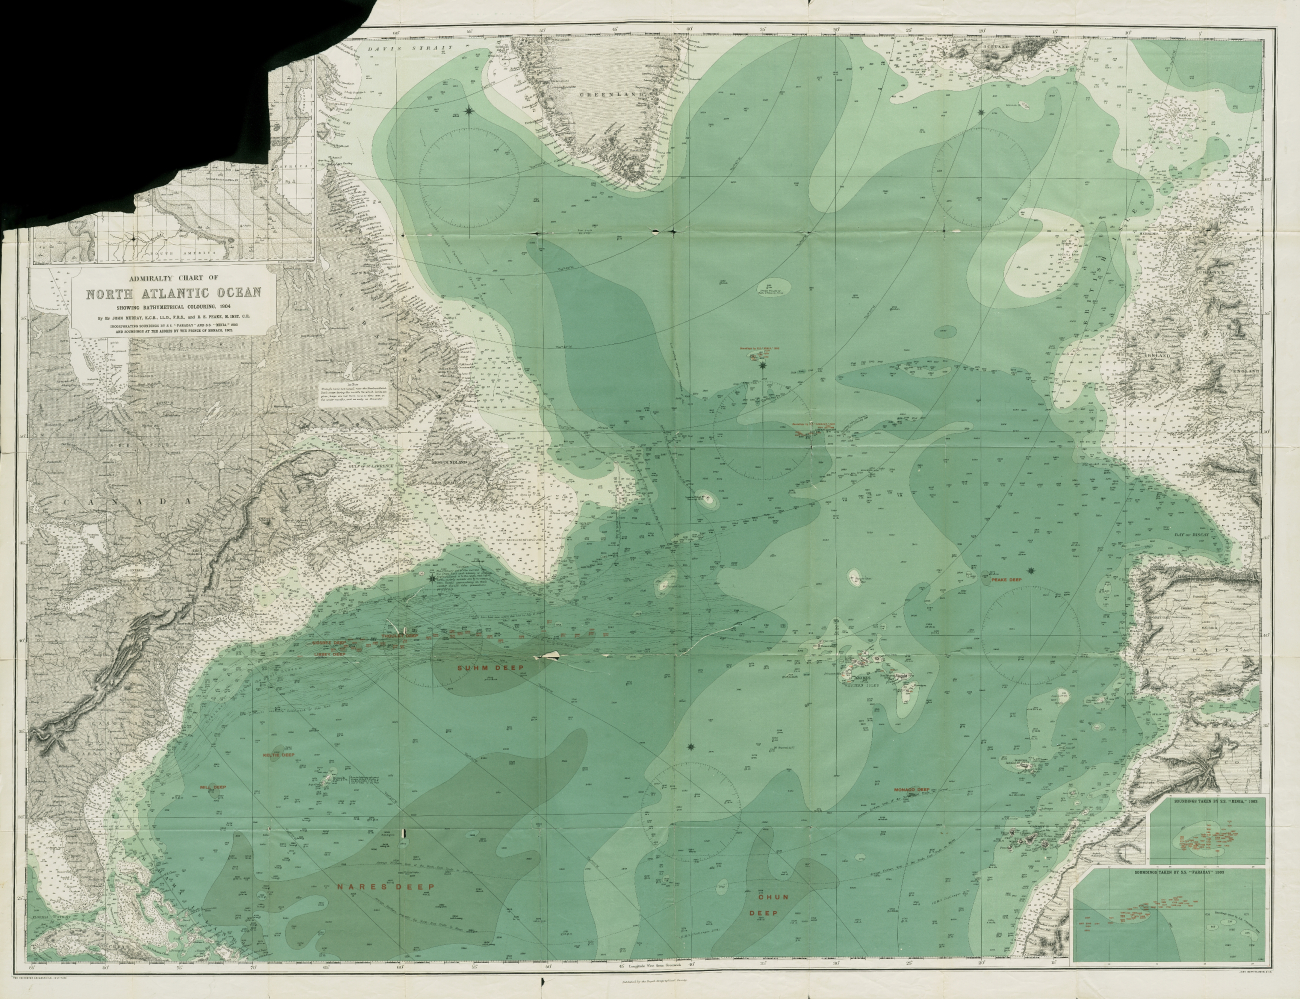 Admiralty Chart of the North Atlantic Ocean showing bathymetrical colouring by Sir John Murray and R